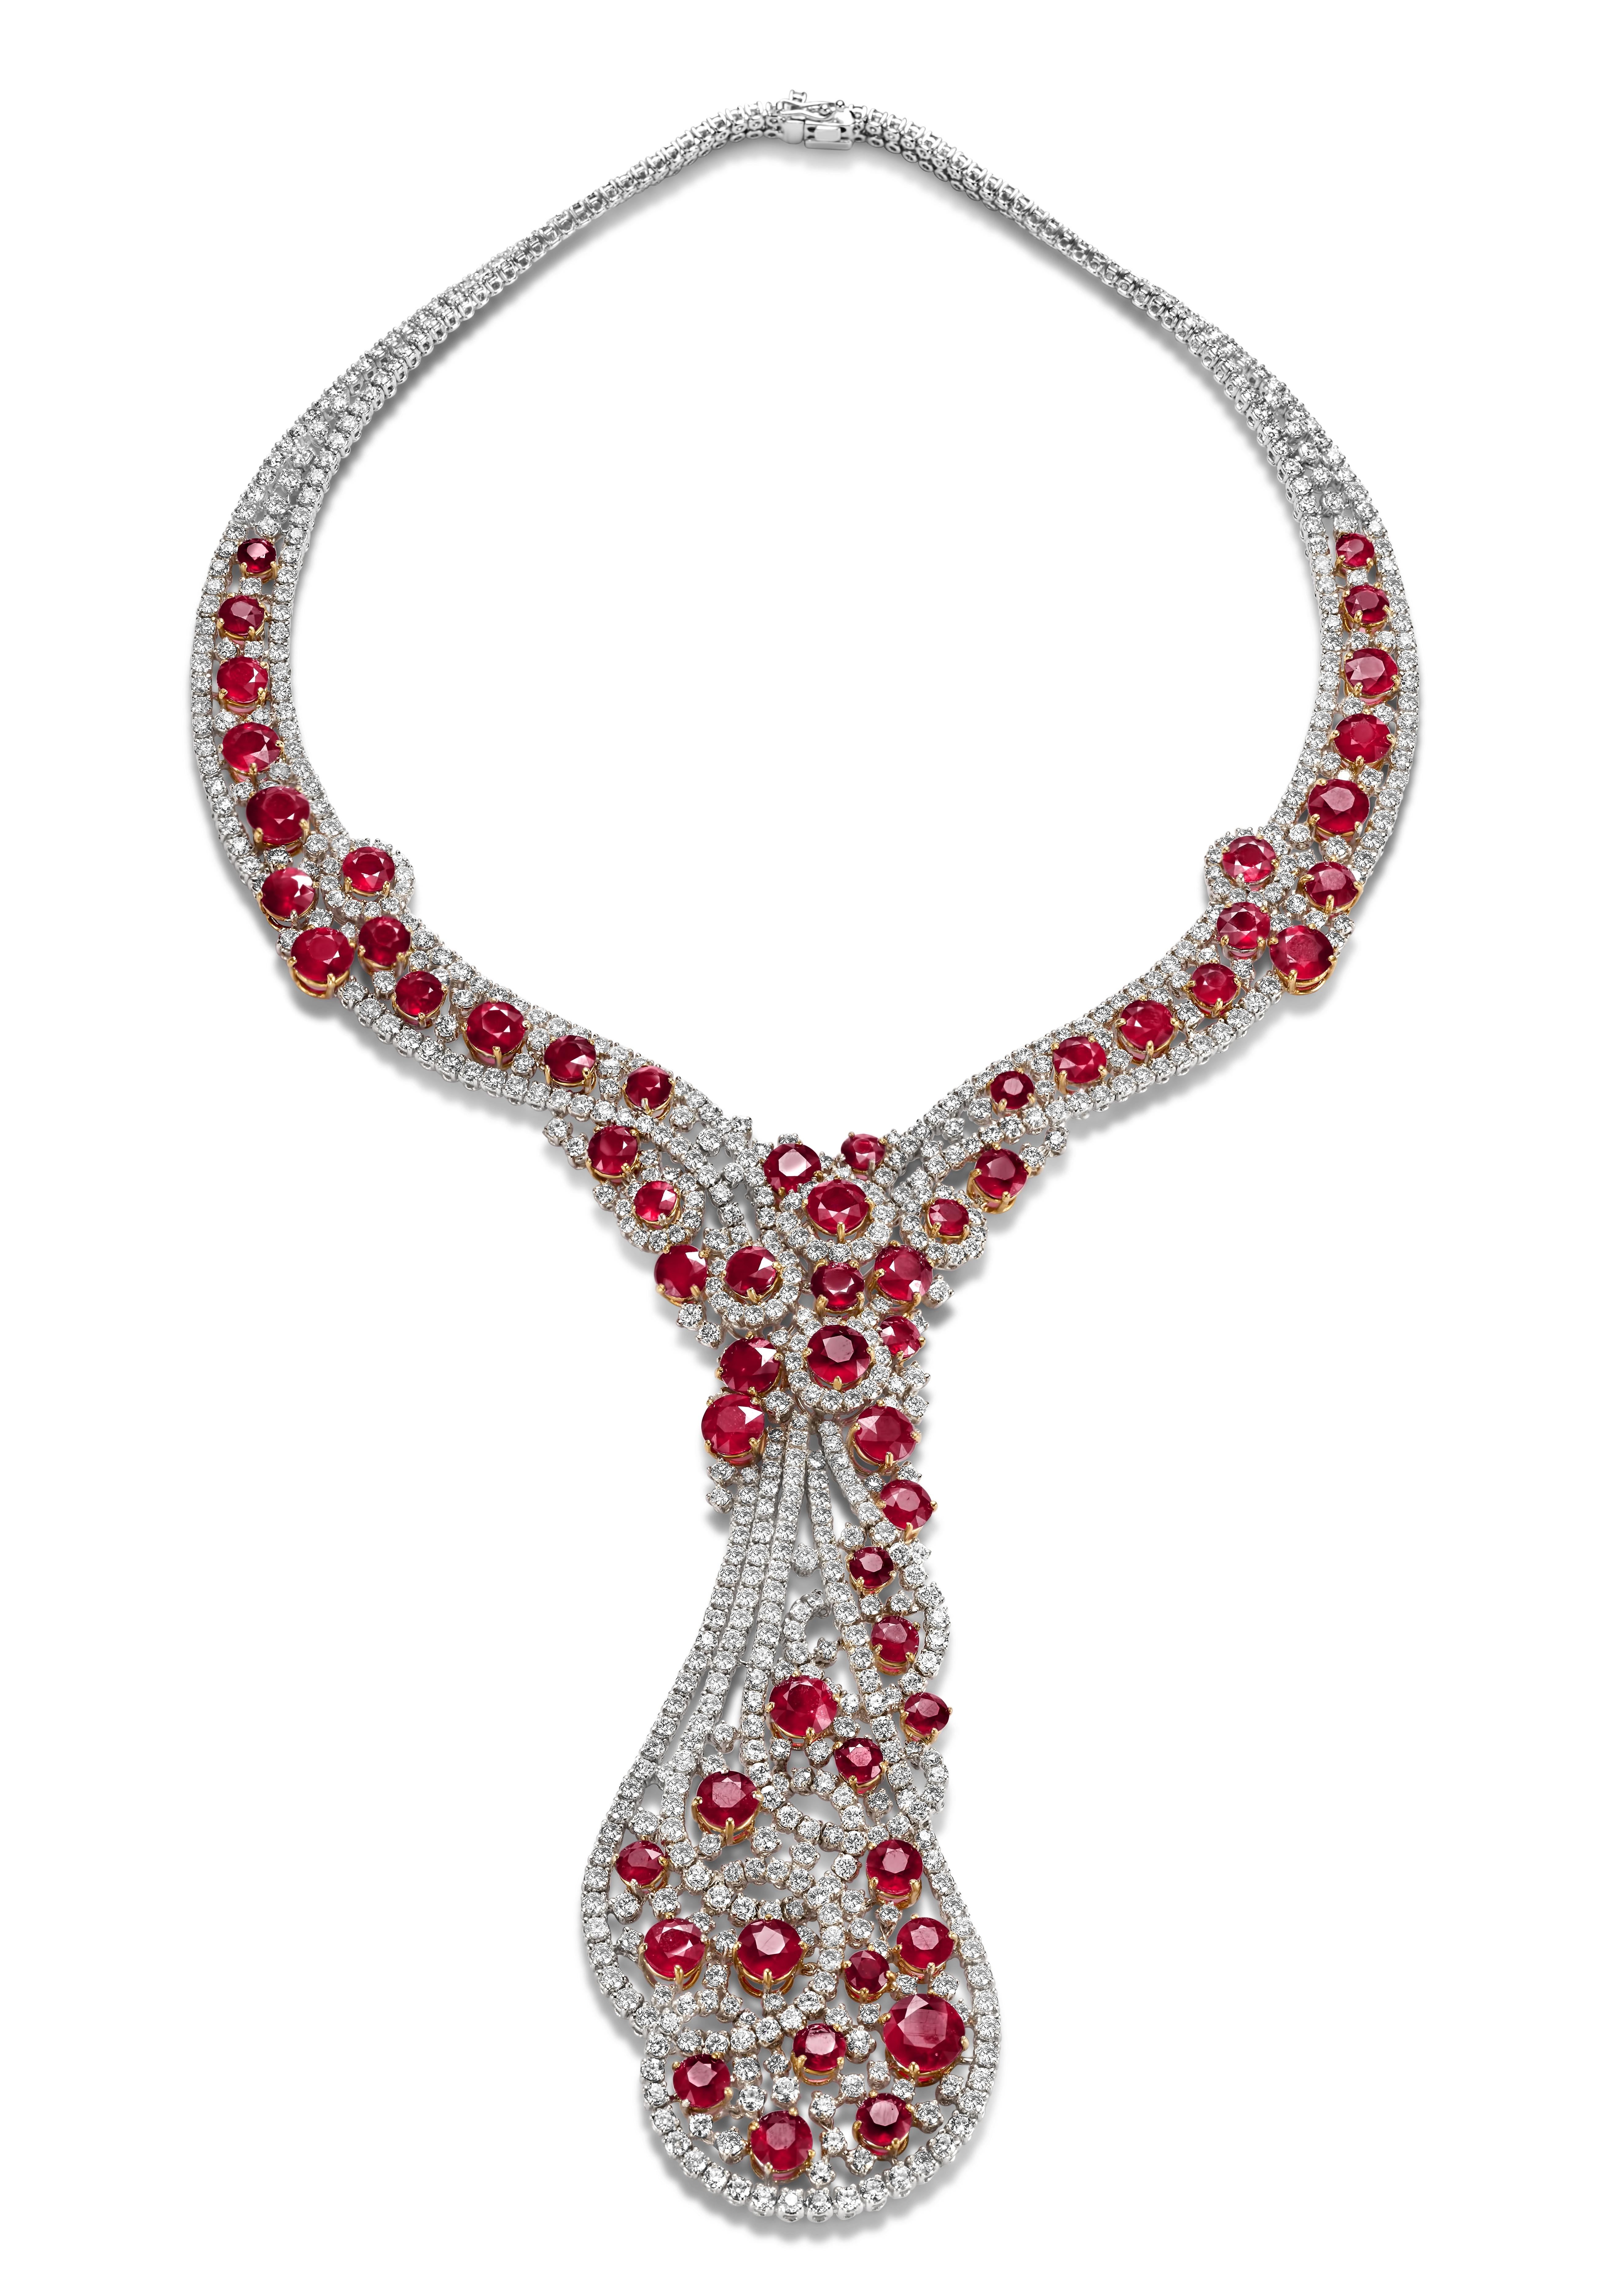 Magnificent Like Never Seen Before Set of 18 kt. Gold Necklace, Earring, Ring, Bracelet, With 116.11 ct. Rubies and together 104.94 ct. Diamonds

This set comes in a grand customized box

Necklace:
Diamonds: Brilliant cut diamonds together 45.71